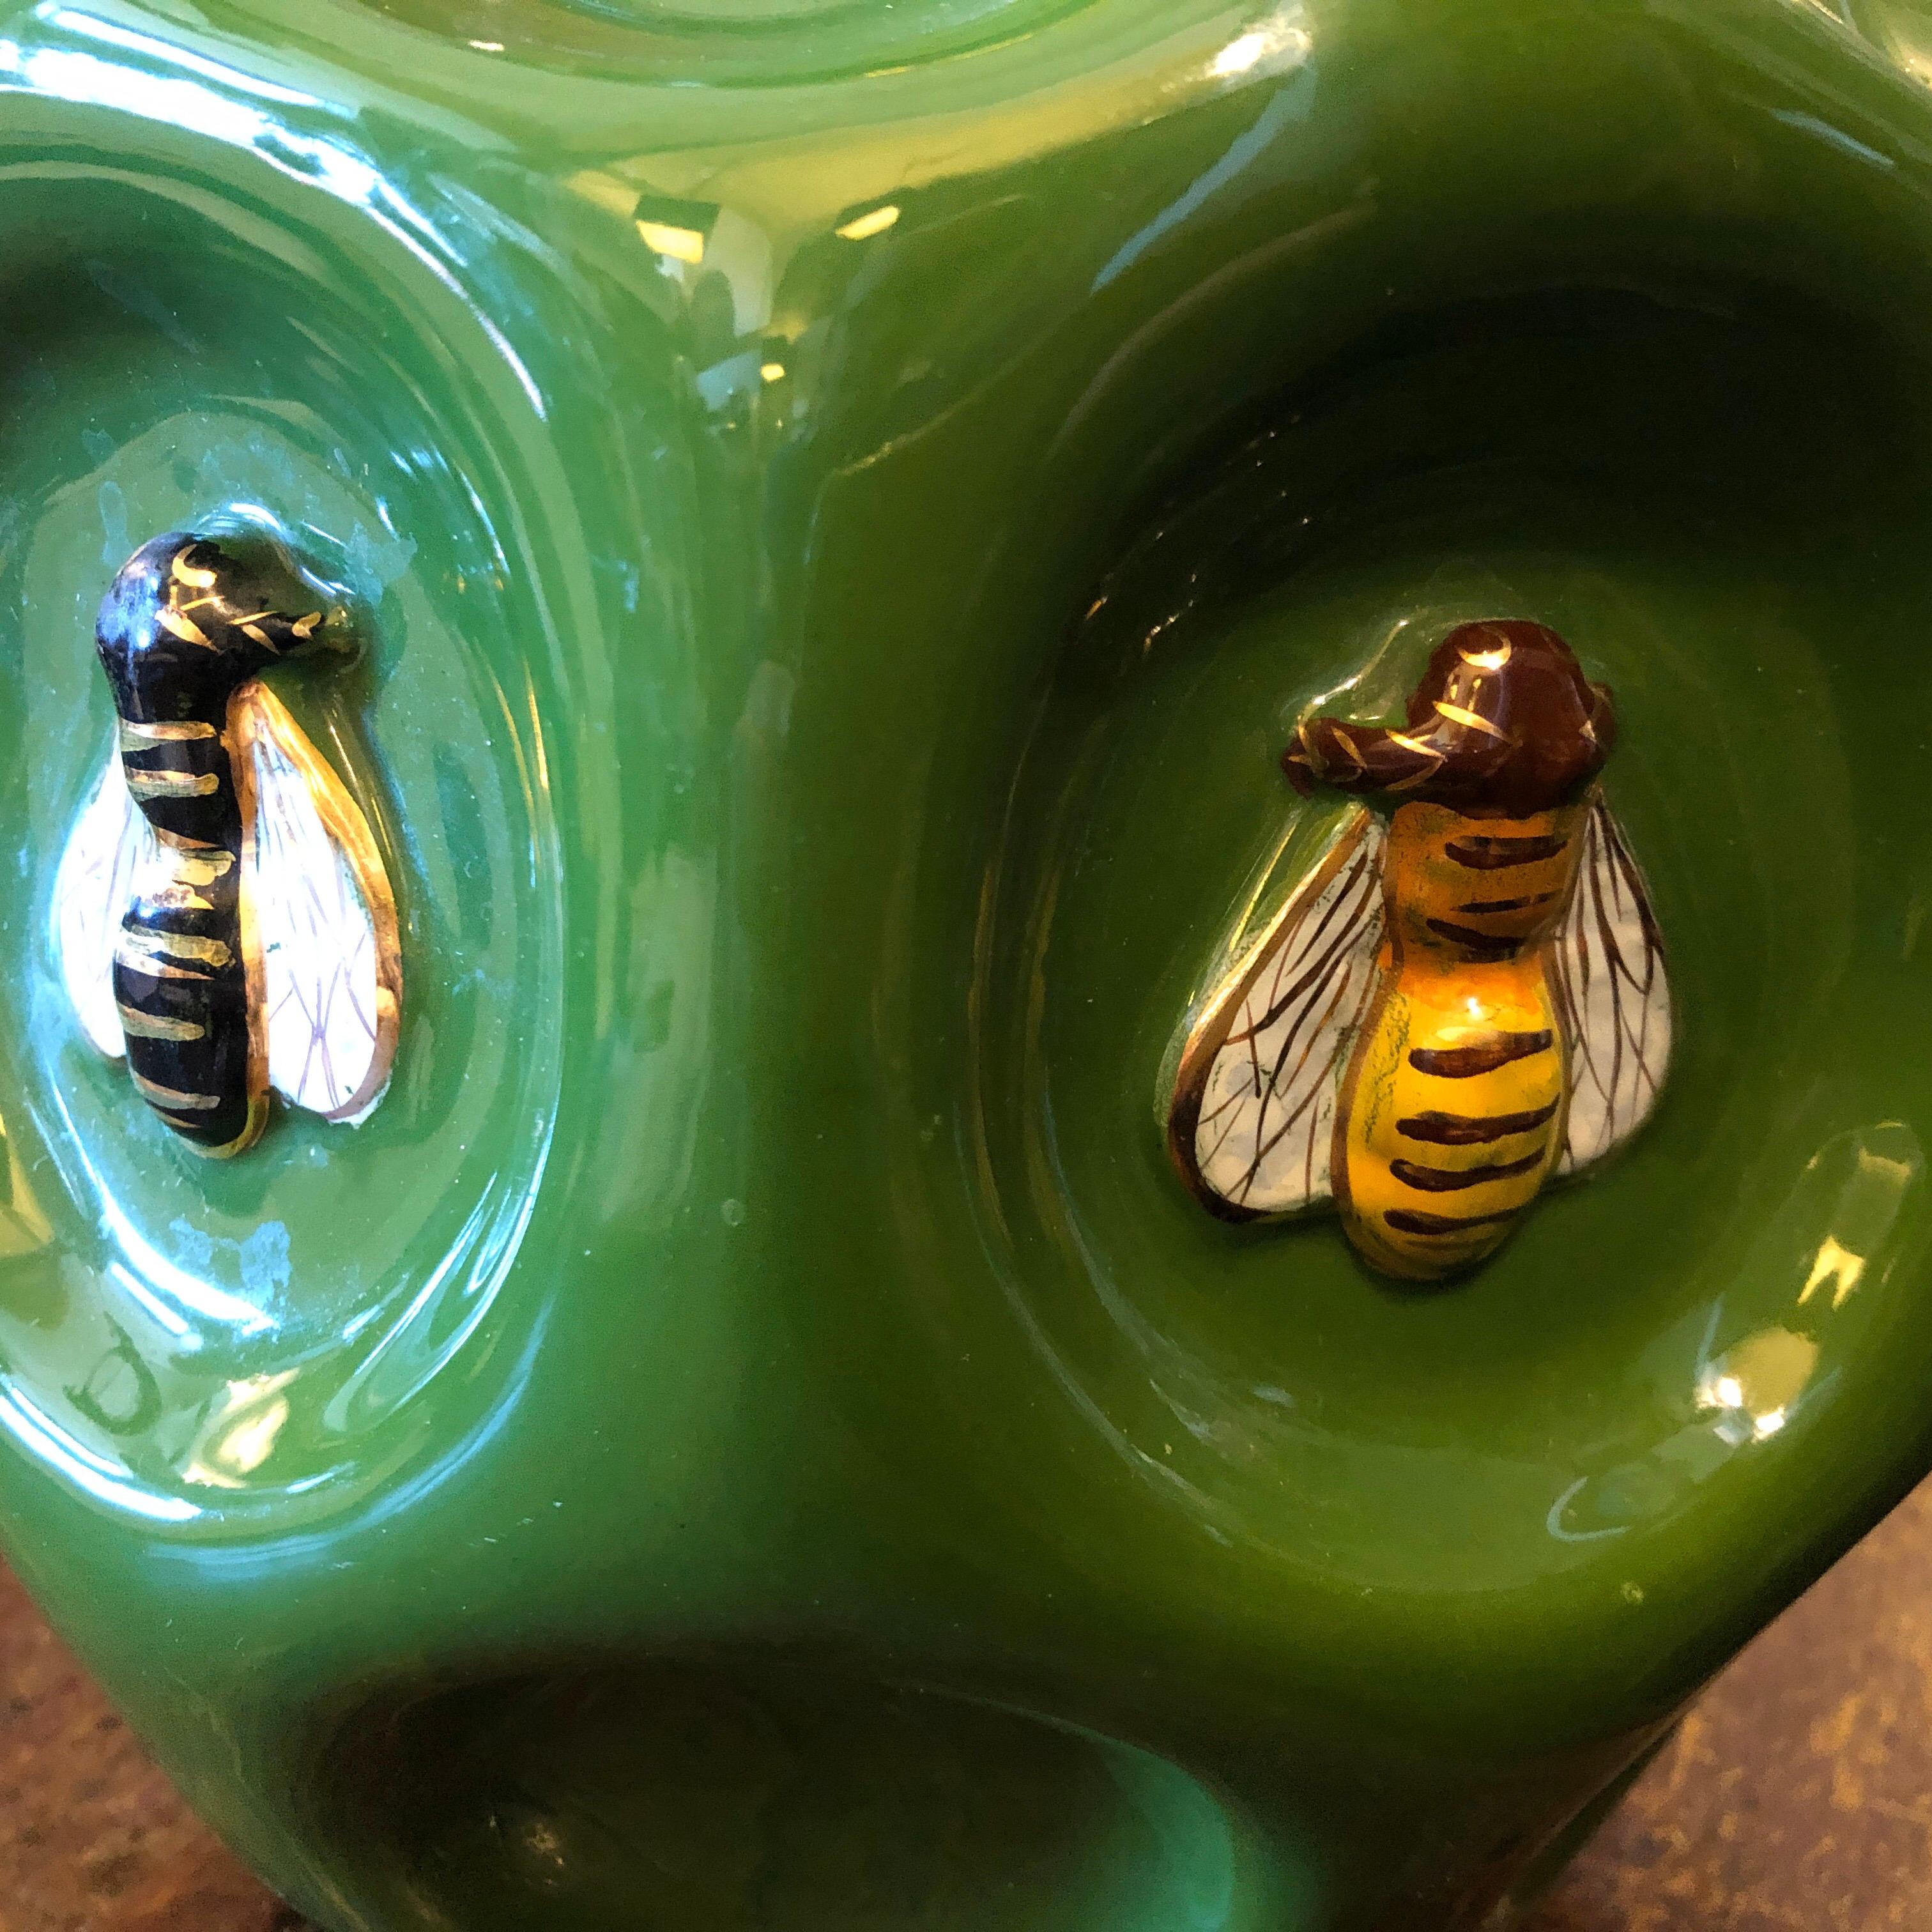 A rare ceramic vase made in Italy in the 1960s. It's marked San Polo on the bottom. The green vase is decorated with bees.